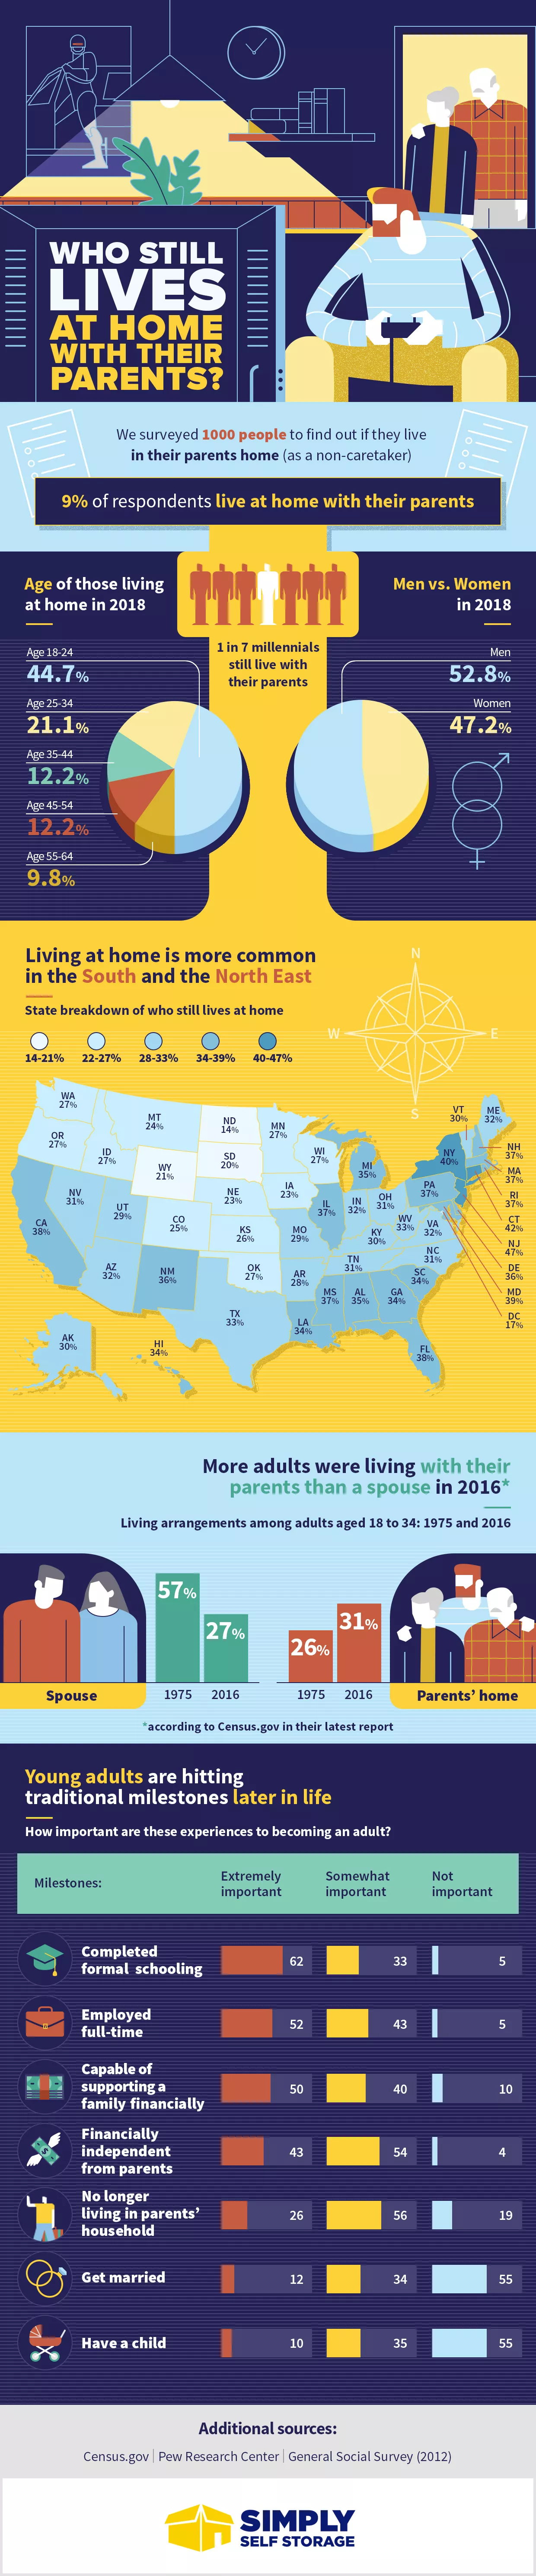 Living at Home with Parents: The New Norm - Infographic